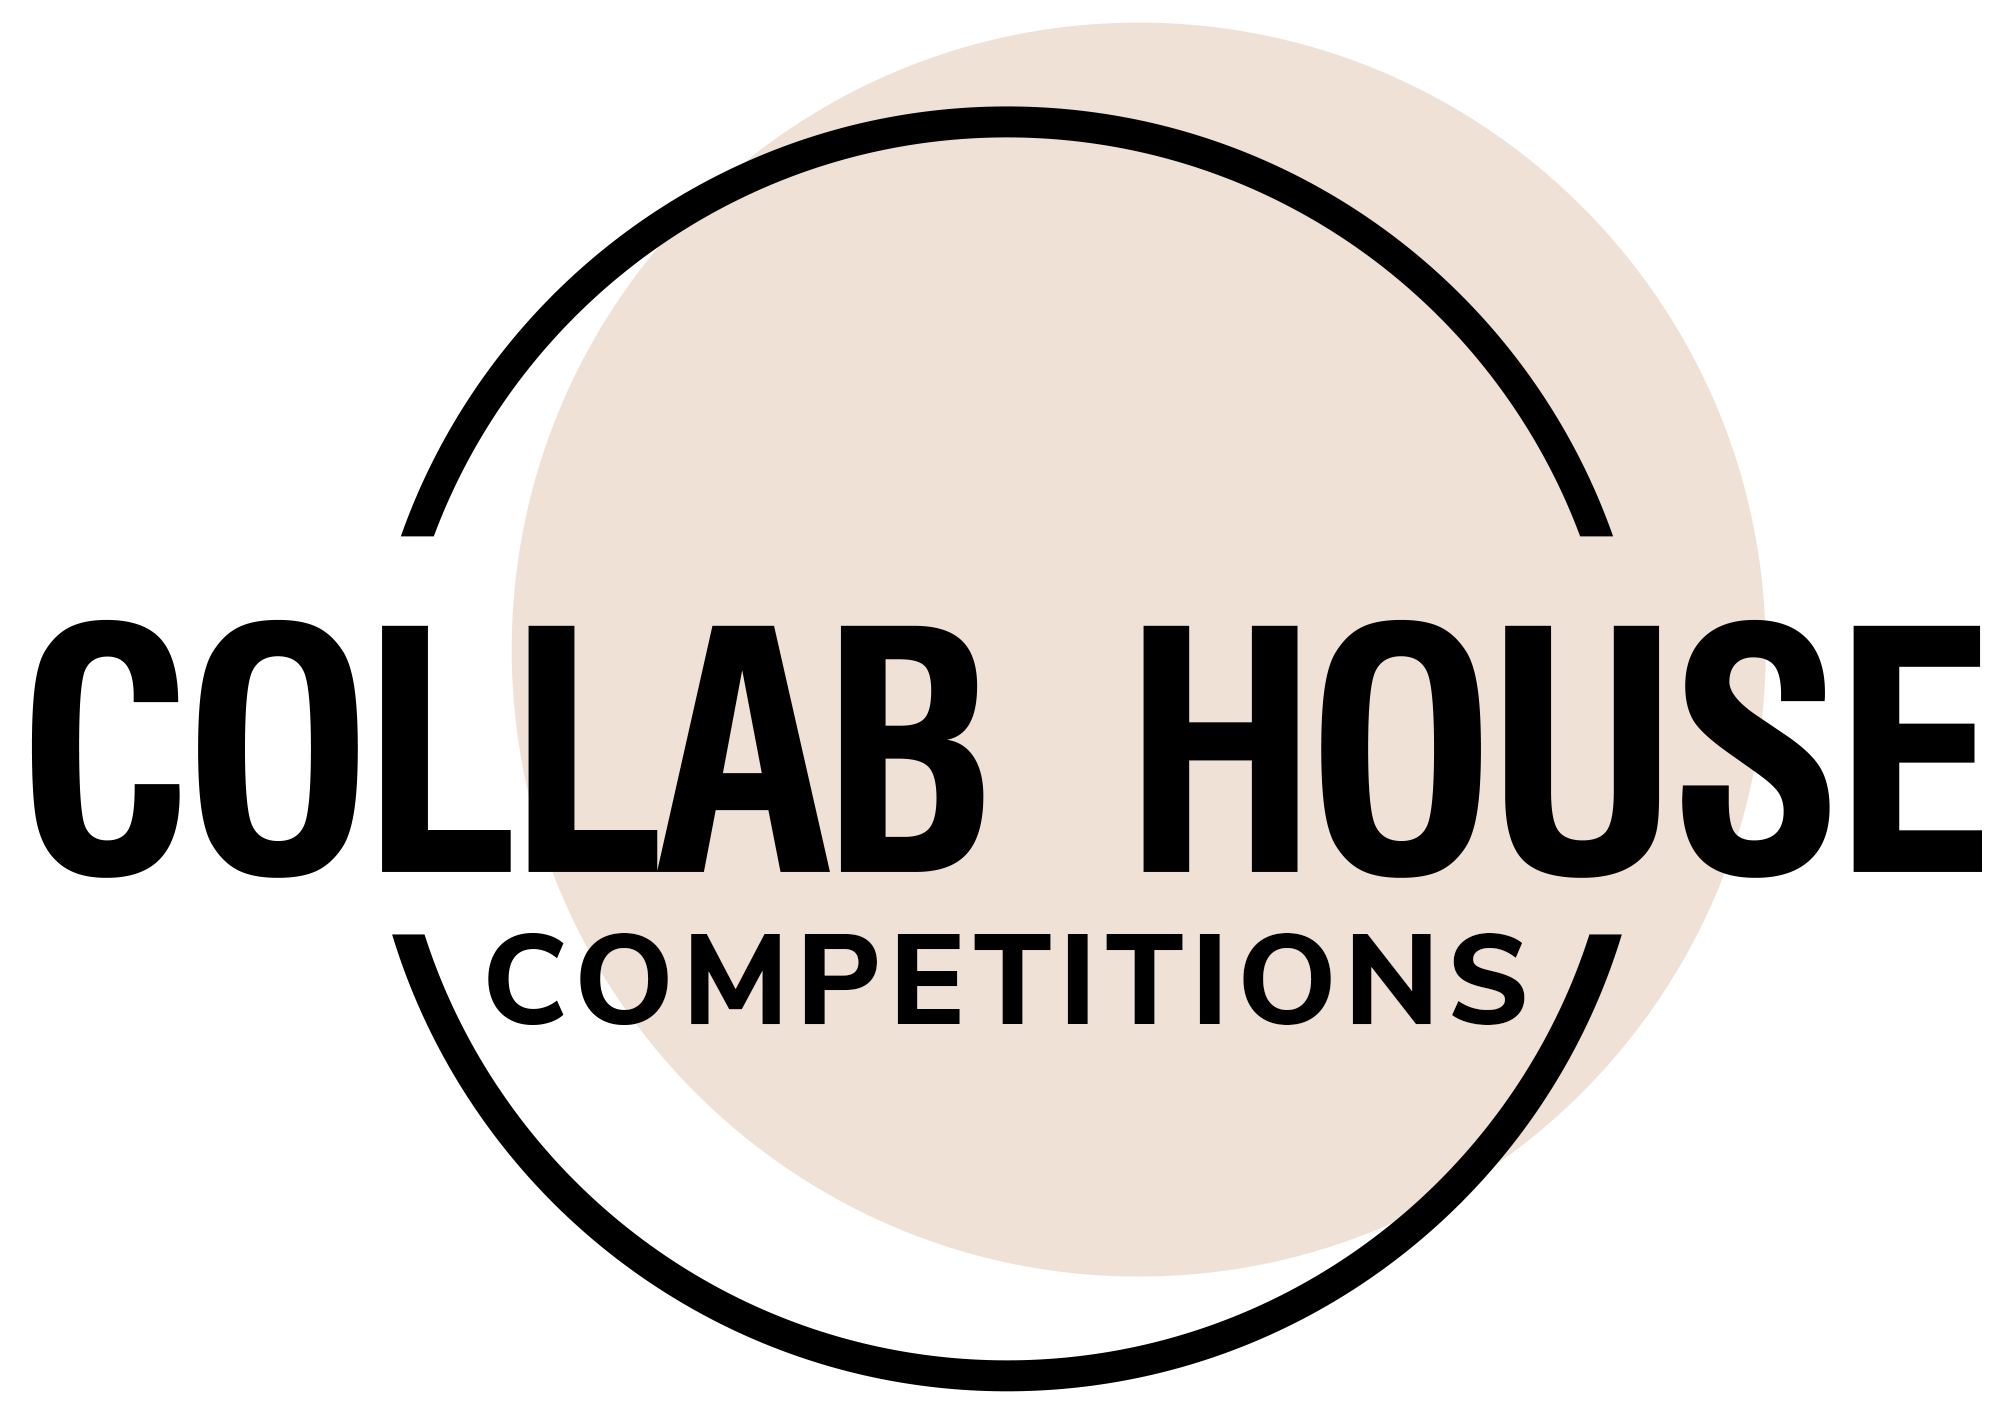 Collab House Competitions